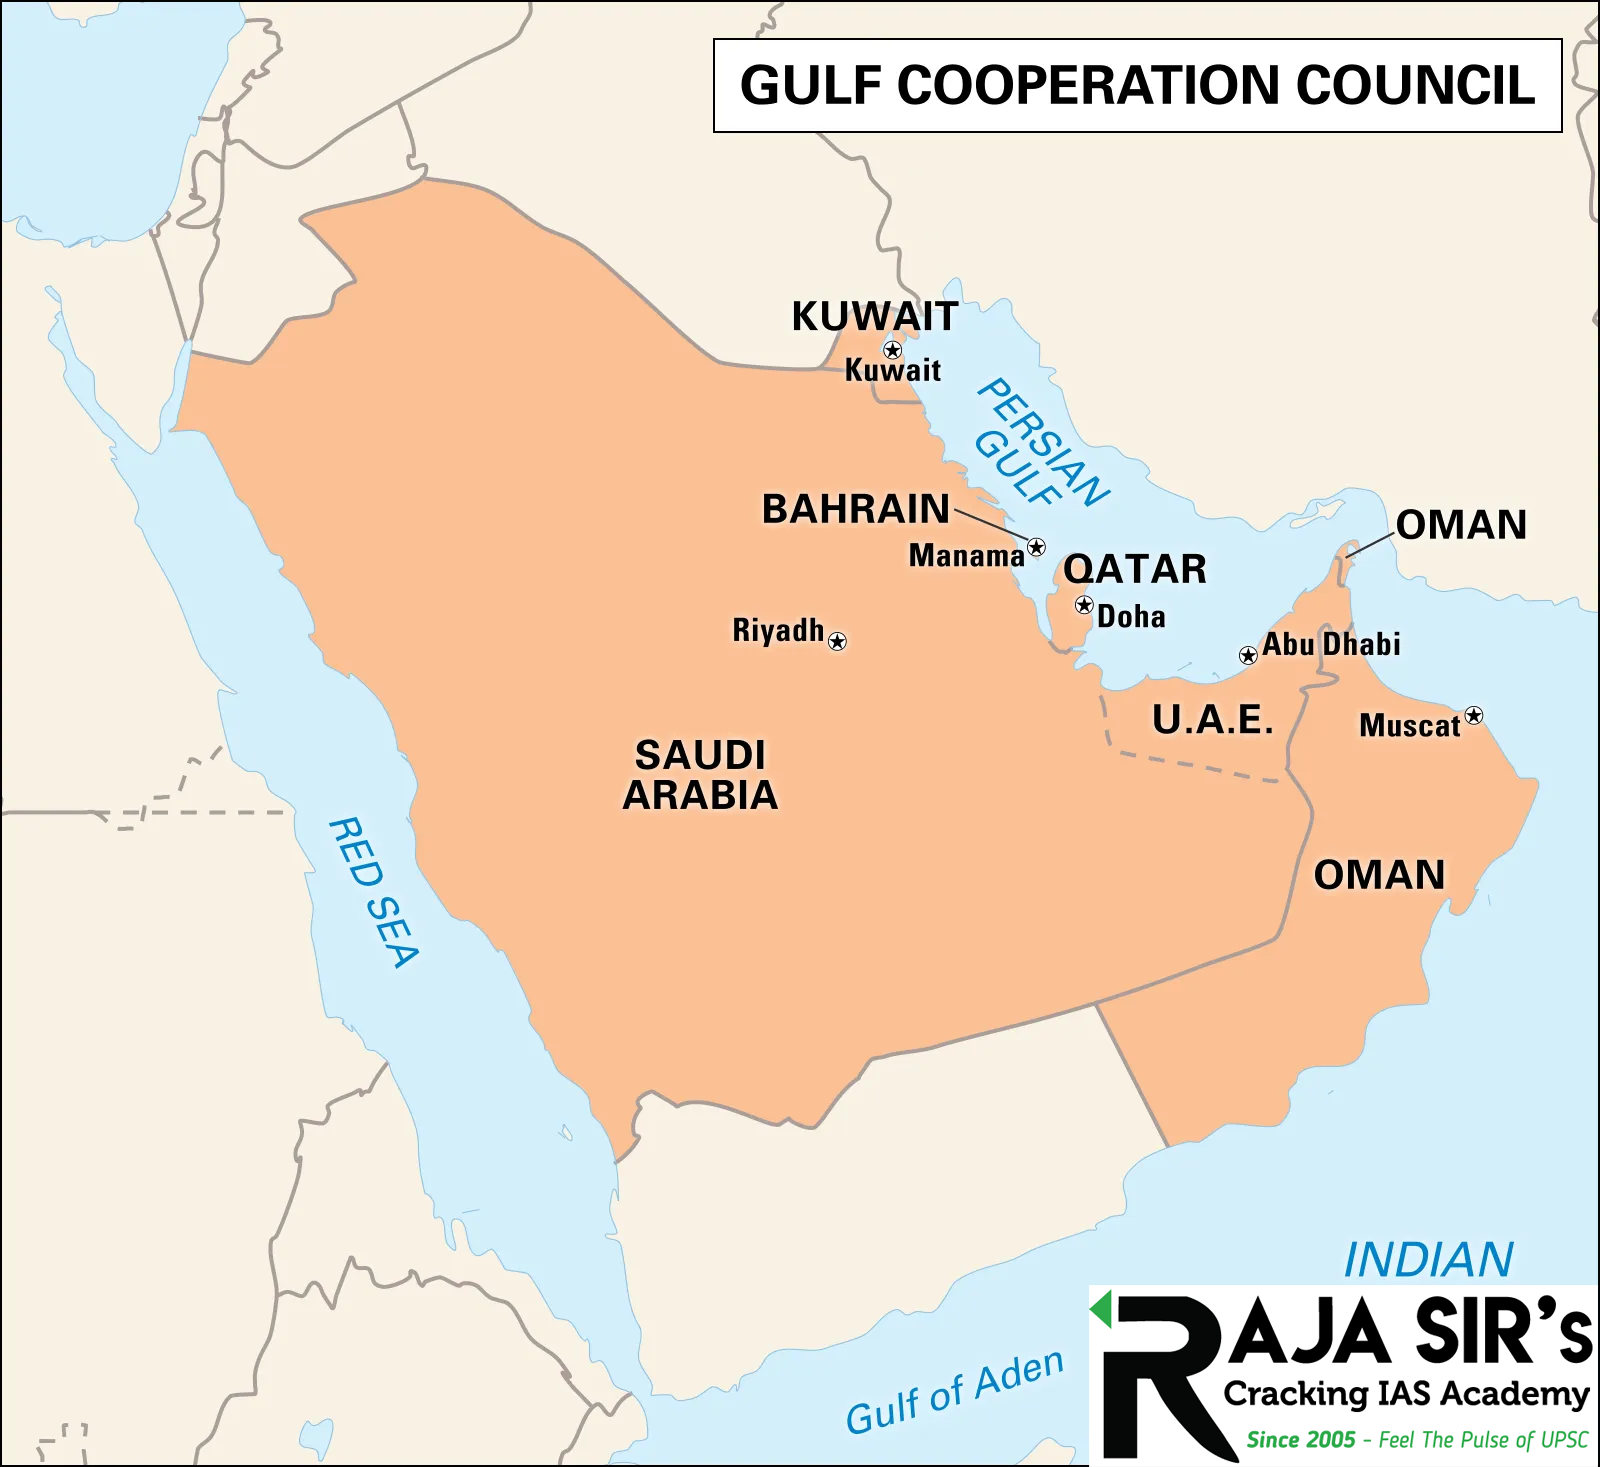 The Cooperation Council for the Arab States of the Gulf, known as the Gulf Cooperation Council (GCC), is a regional and economic union established in 1981. Members: Bahrain, Kuwait, Oman, Qatar, Saudi Arabia, and the United Arab Emirates Headquarters: Riyadh, Saudi Arabia. Aim: To achieve unity among its members based on their common objectives and their similar political and cultural identities, which are rooted in Arab and Islamic cultures. Out of 32 million non-resident Indians (NRIs), nearly half are estimated to be working in GCC countries. According to World Bank, India got $87 billion in foreign remittances in 2021. A noticeable portion came from the GCC nations.